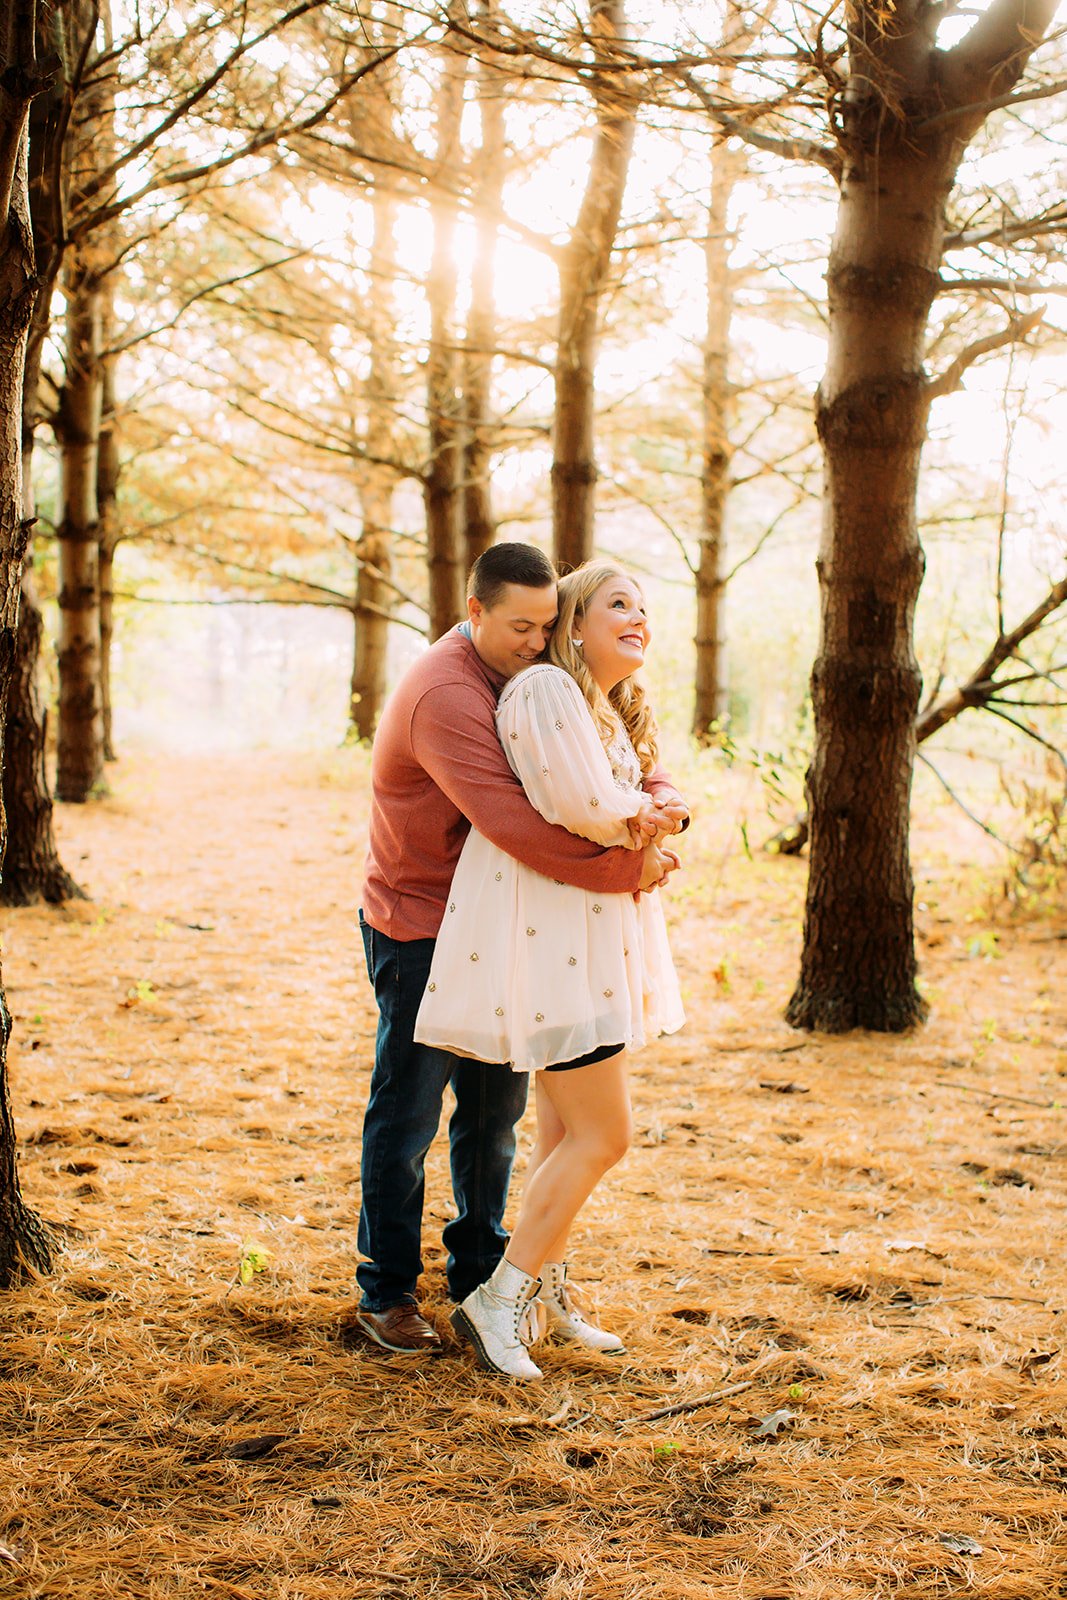  During a family photography session with Teala Ward Photography a husband and wife hug in a yellow hue forest. yellow hue pic #TealaWardPhotography #TealaWardFamilies #holidayfamilypics #photography #Illinoisfamilyphotography #familysession 